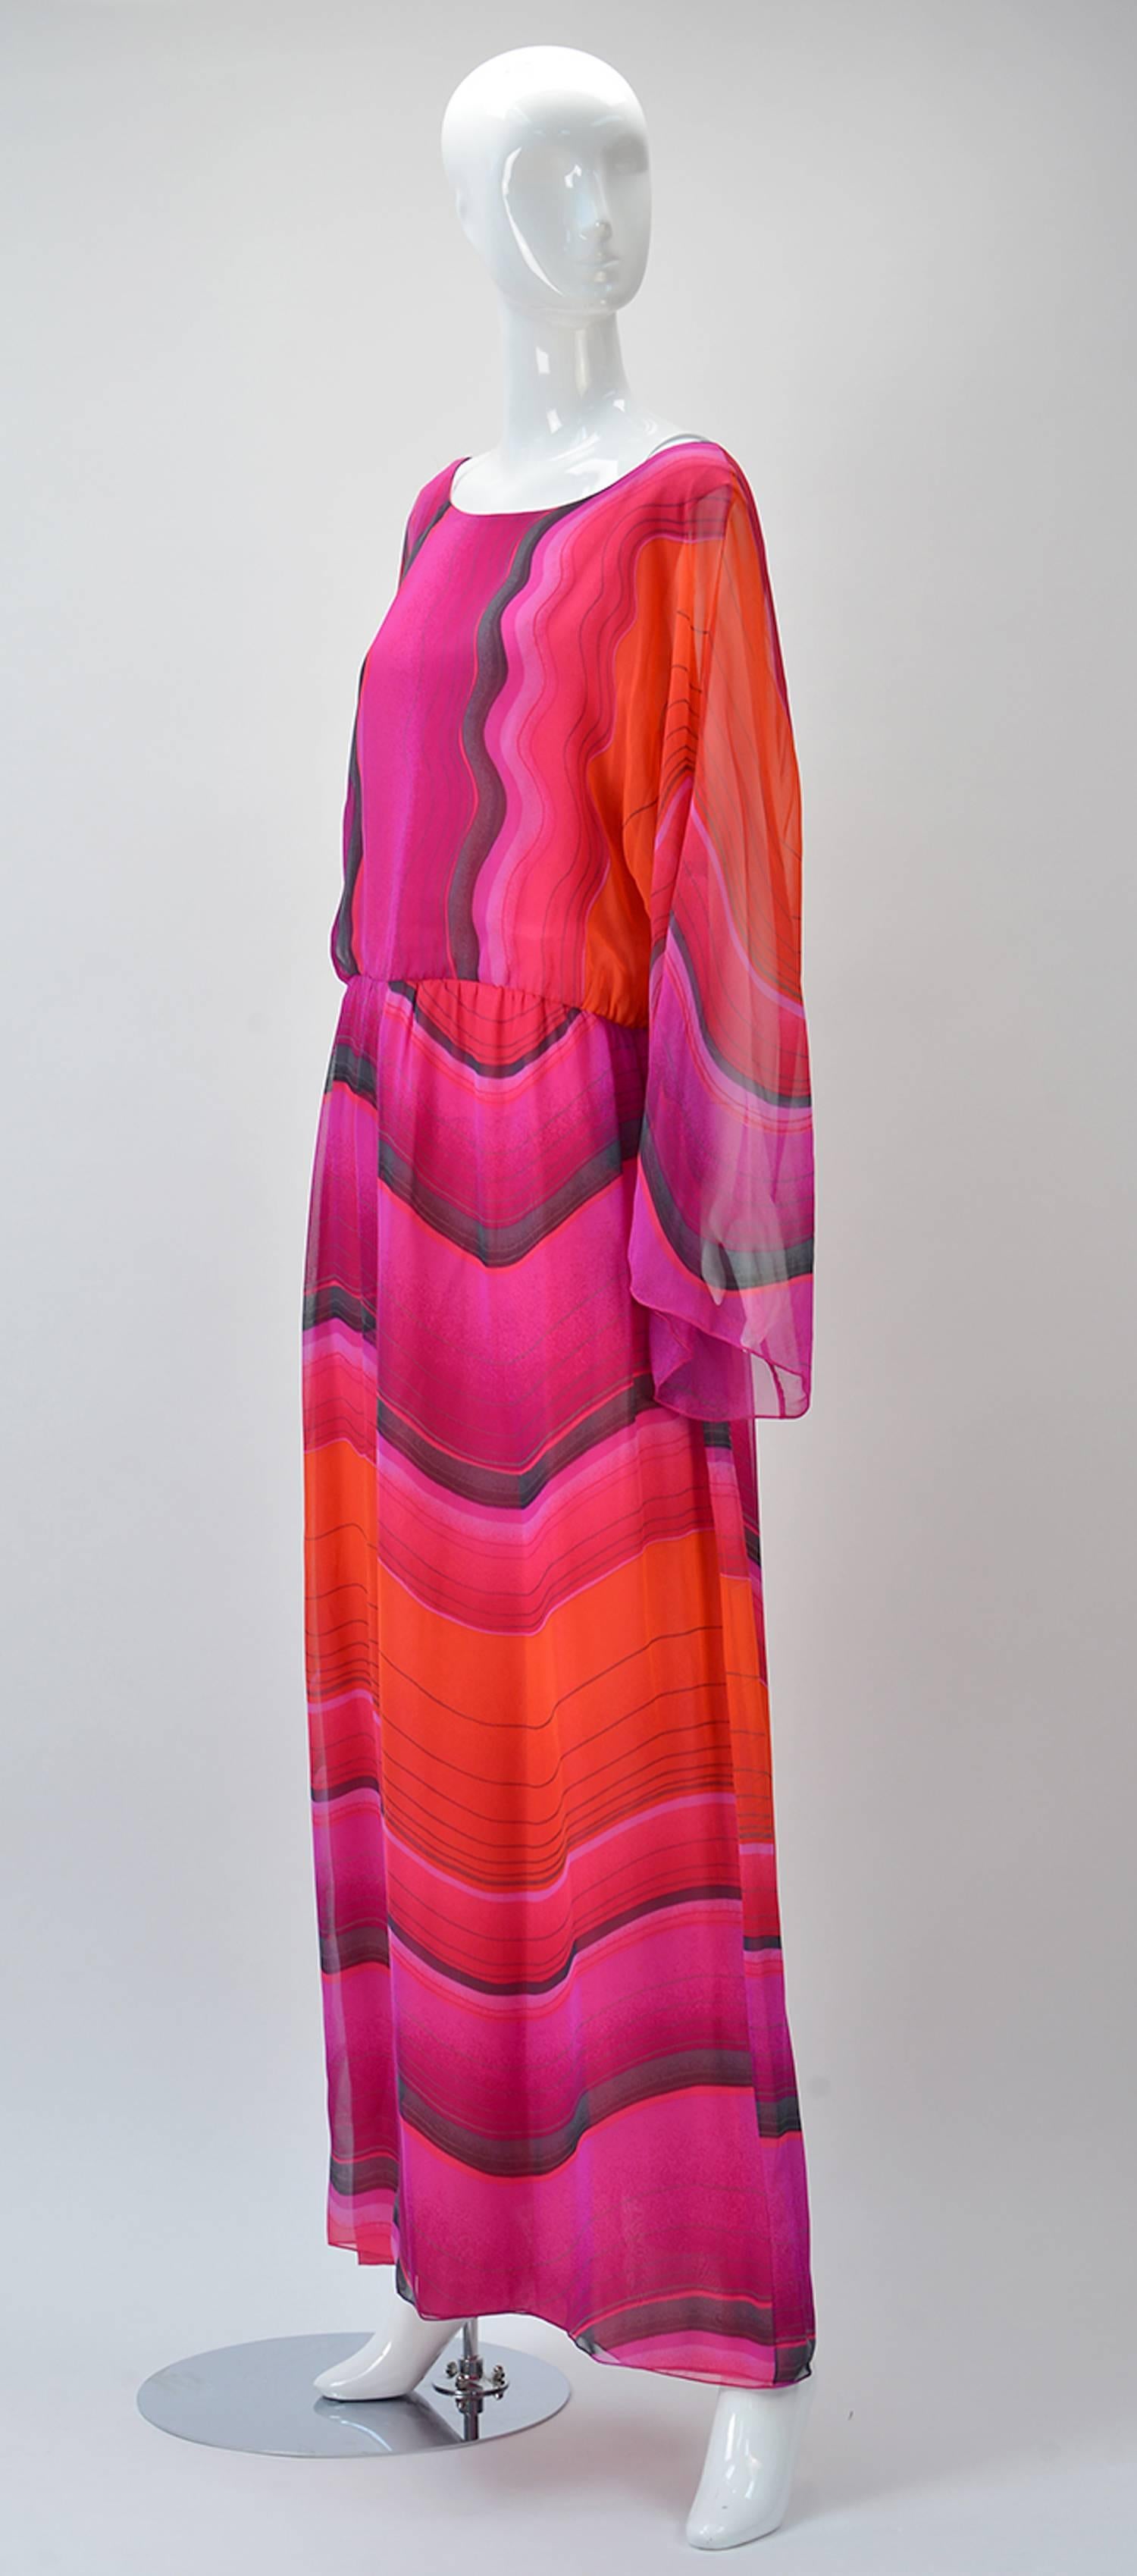 
Hana Mori is known for her delicate silk dresses and this one is spectacular. The print could have been inspired by Red Rock Canyon in Nevada with reds pinks and grays. The length of the dress is maxi depending on your height. Extra long sleeves